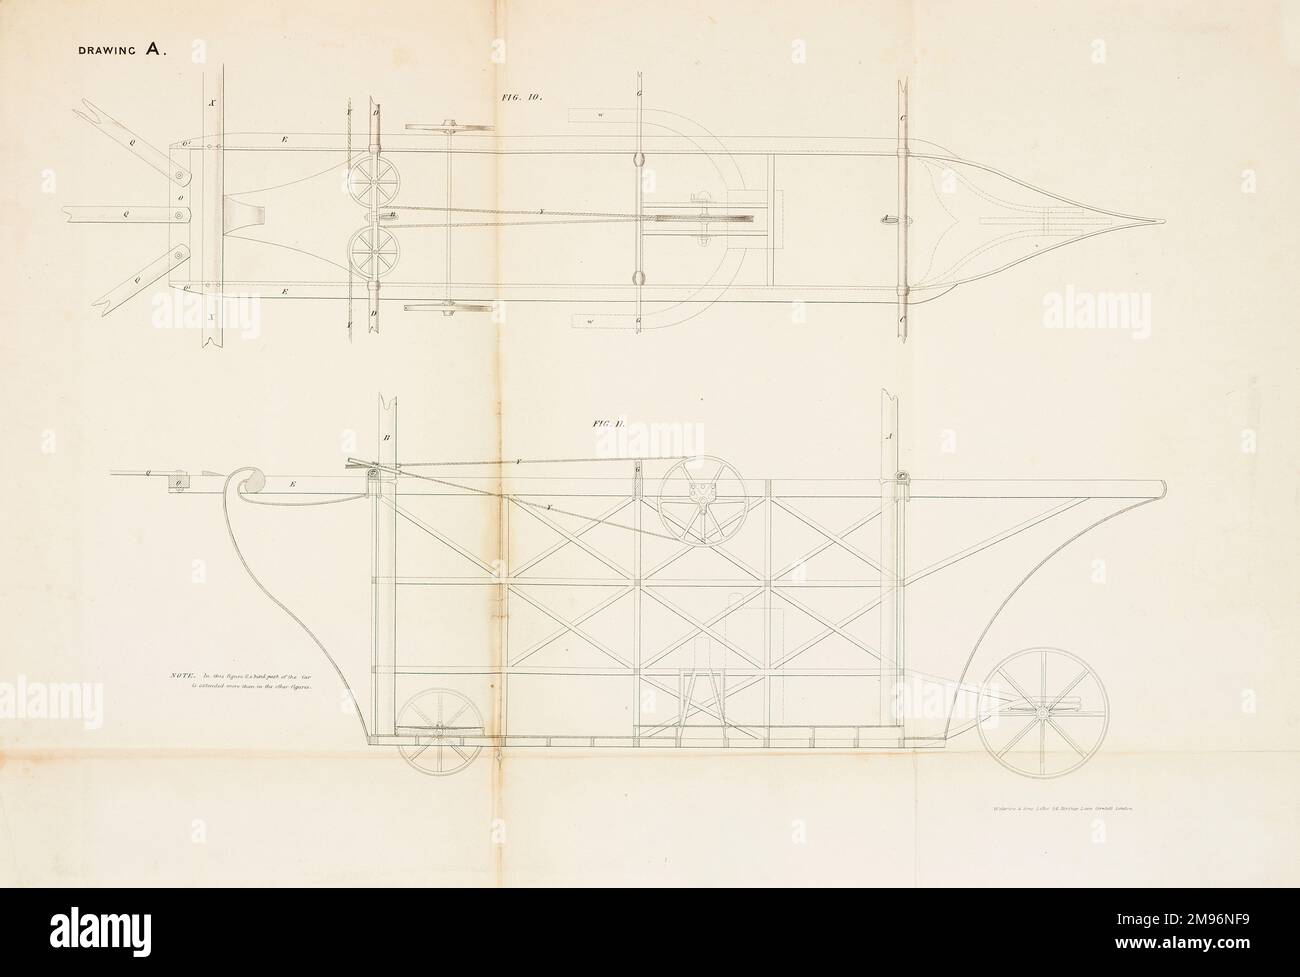 The Aerial Steam Carriage -- enlarged view of the car or carriage.  This flying machine was patented by William Samuel Henson (1812-1888) and John Stringfellow (1799-1883) in 1842. Stock Photo